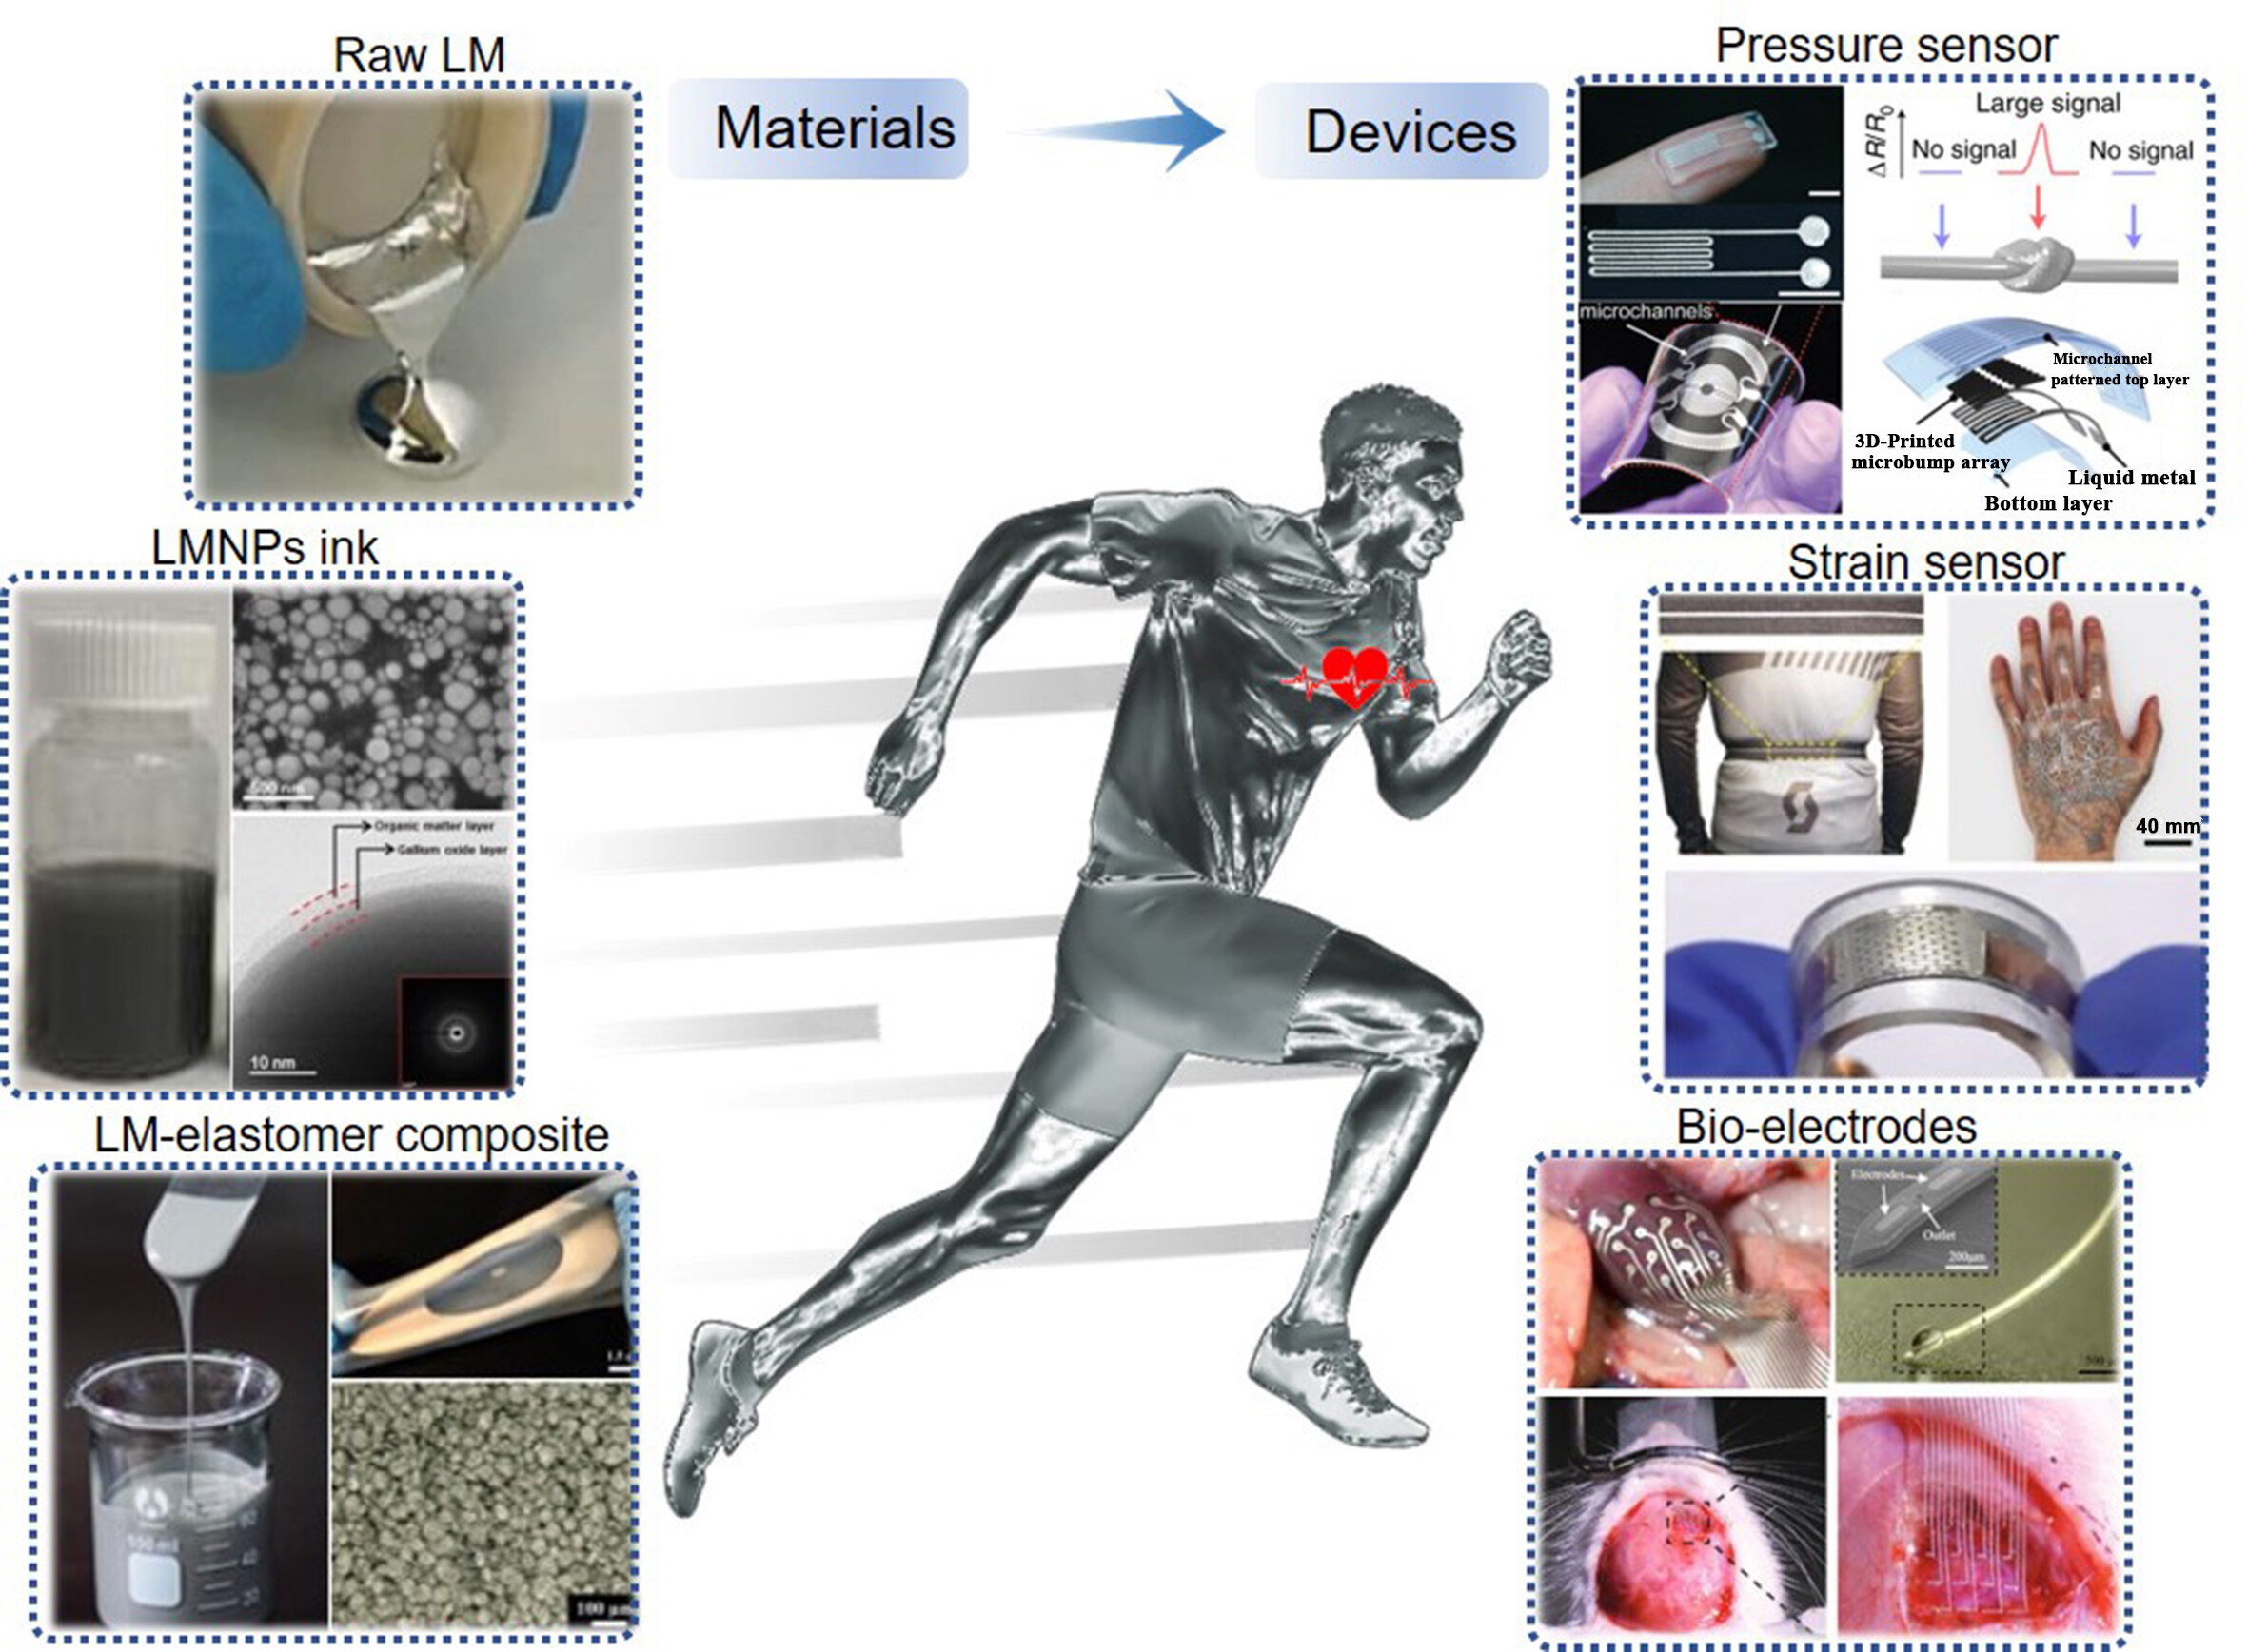 Recent advancements in liquid metal enabled flexible and wearable biosensors